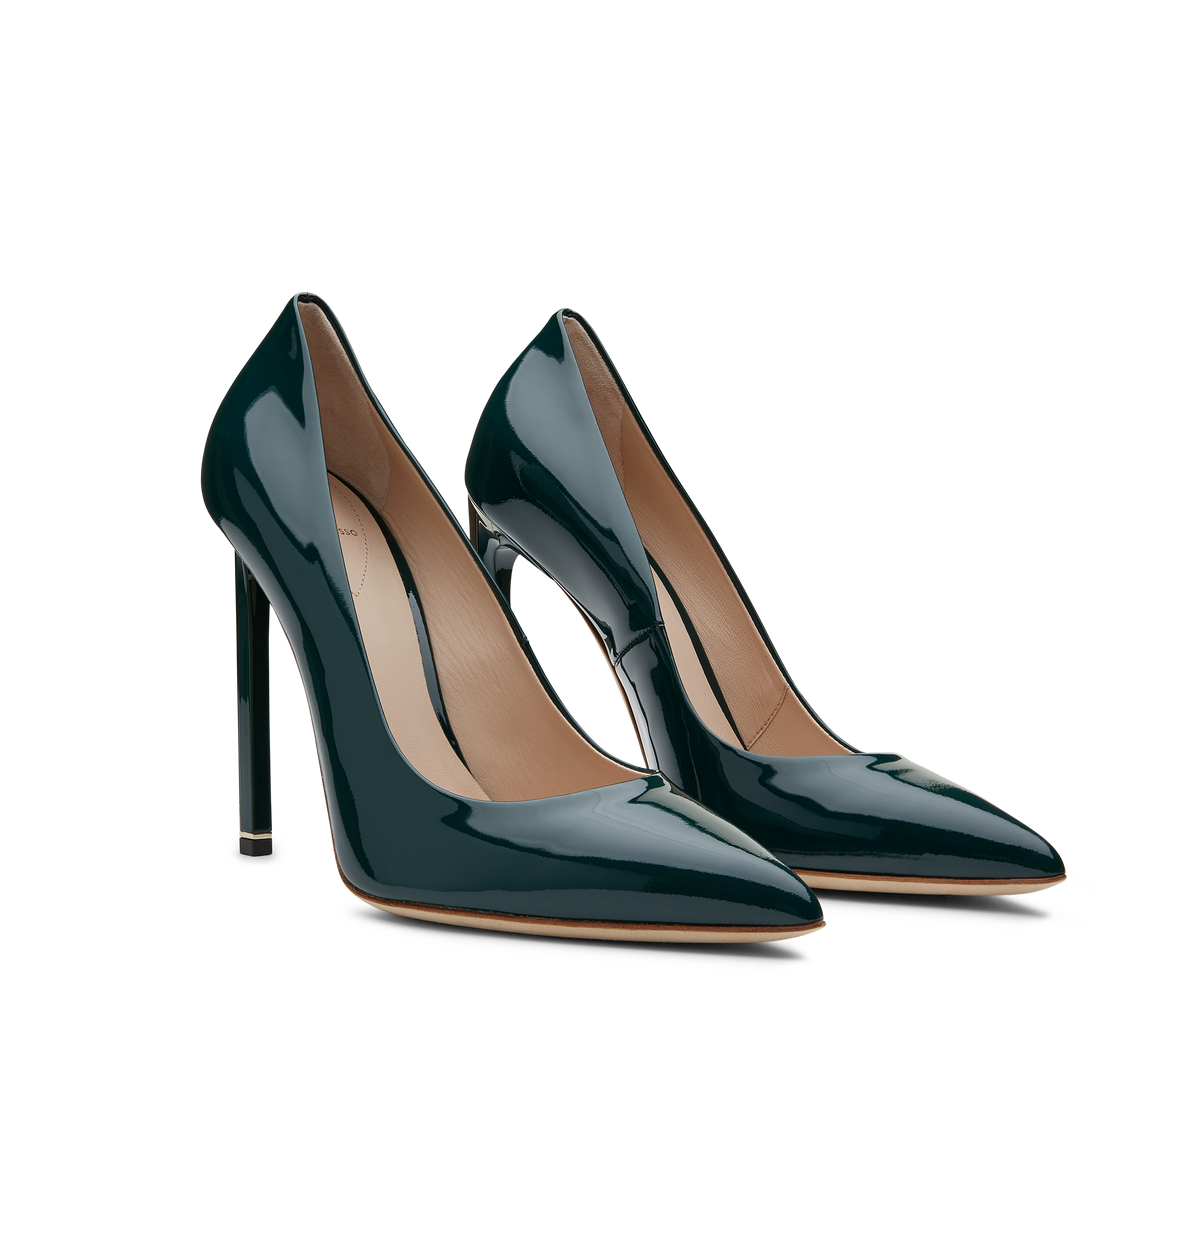 Emerald Patent Leather With Light Gold Hardware